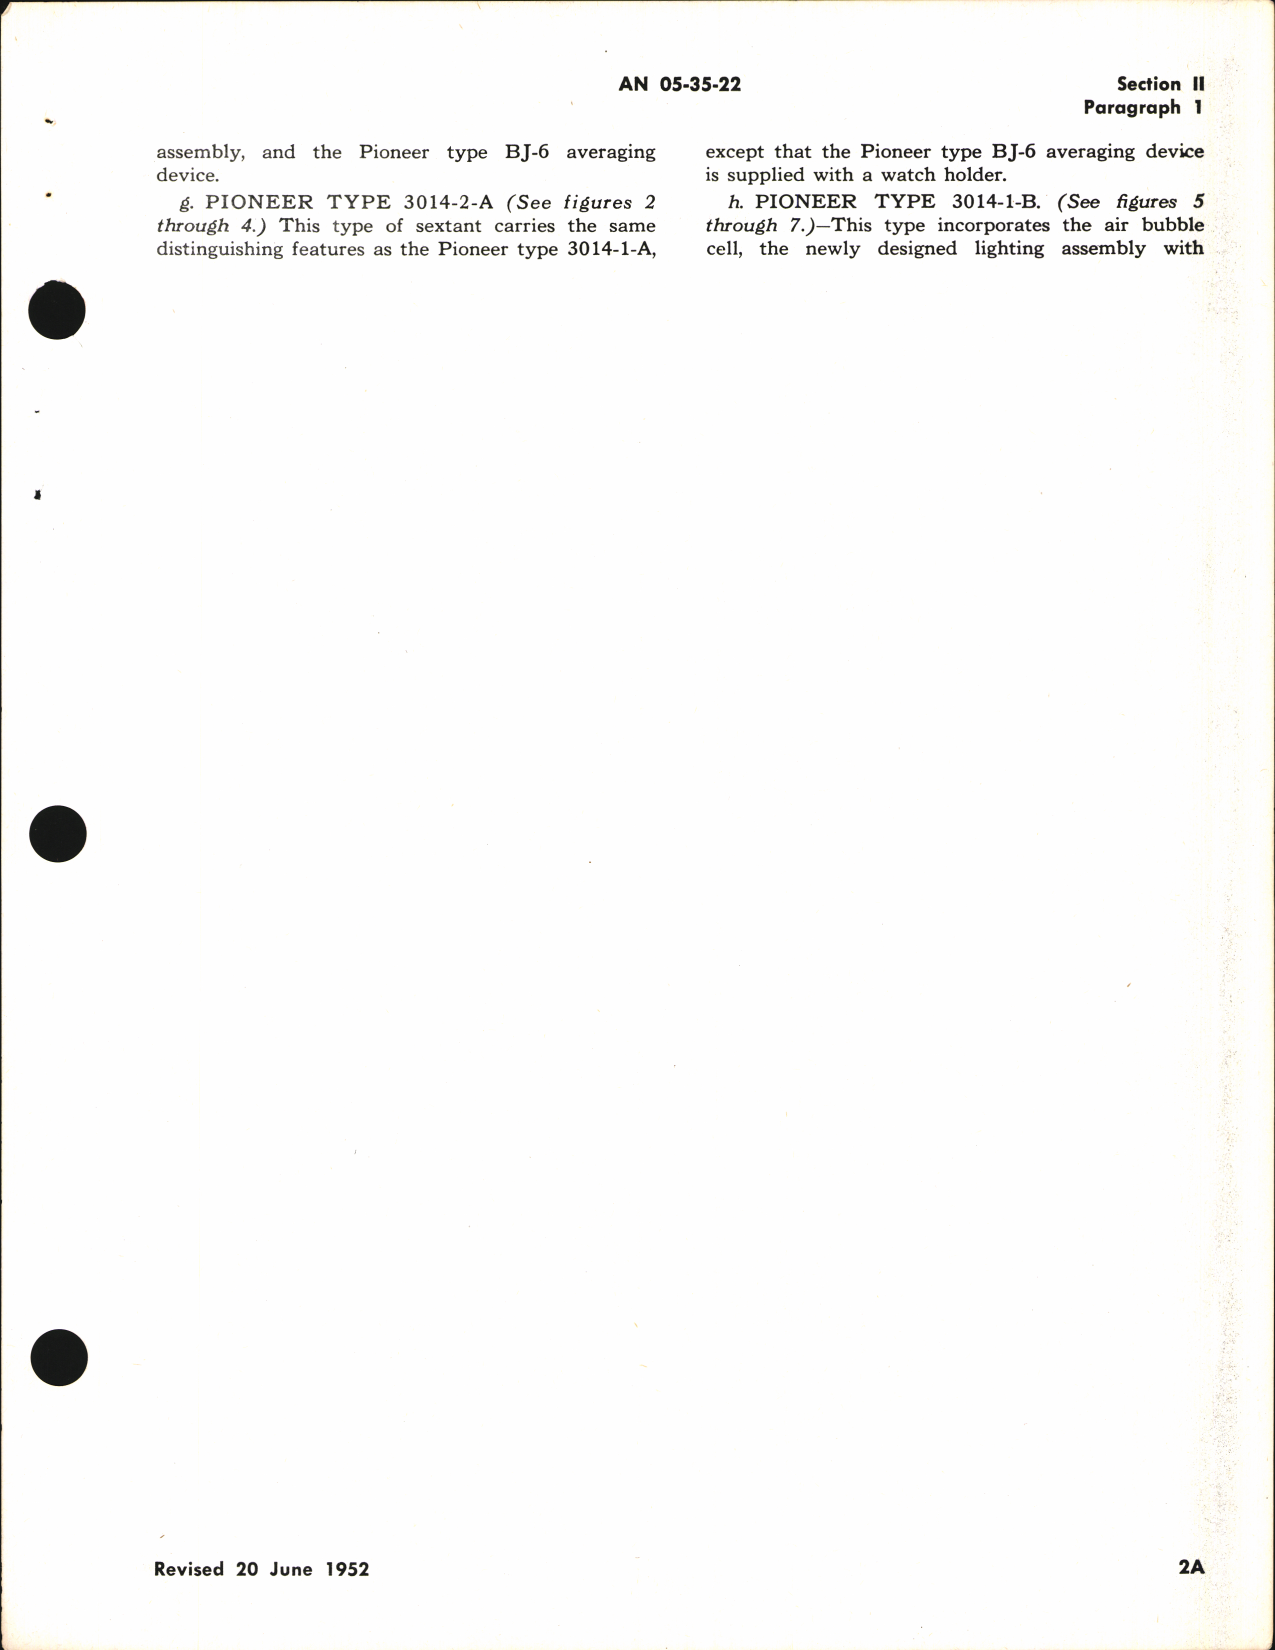 Sample page 7 from AirCorps Library document: Operation, Service, & Overhaul Instructions with Parts Catalog for AN5851-1 Aircraft Sextant